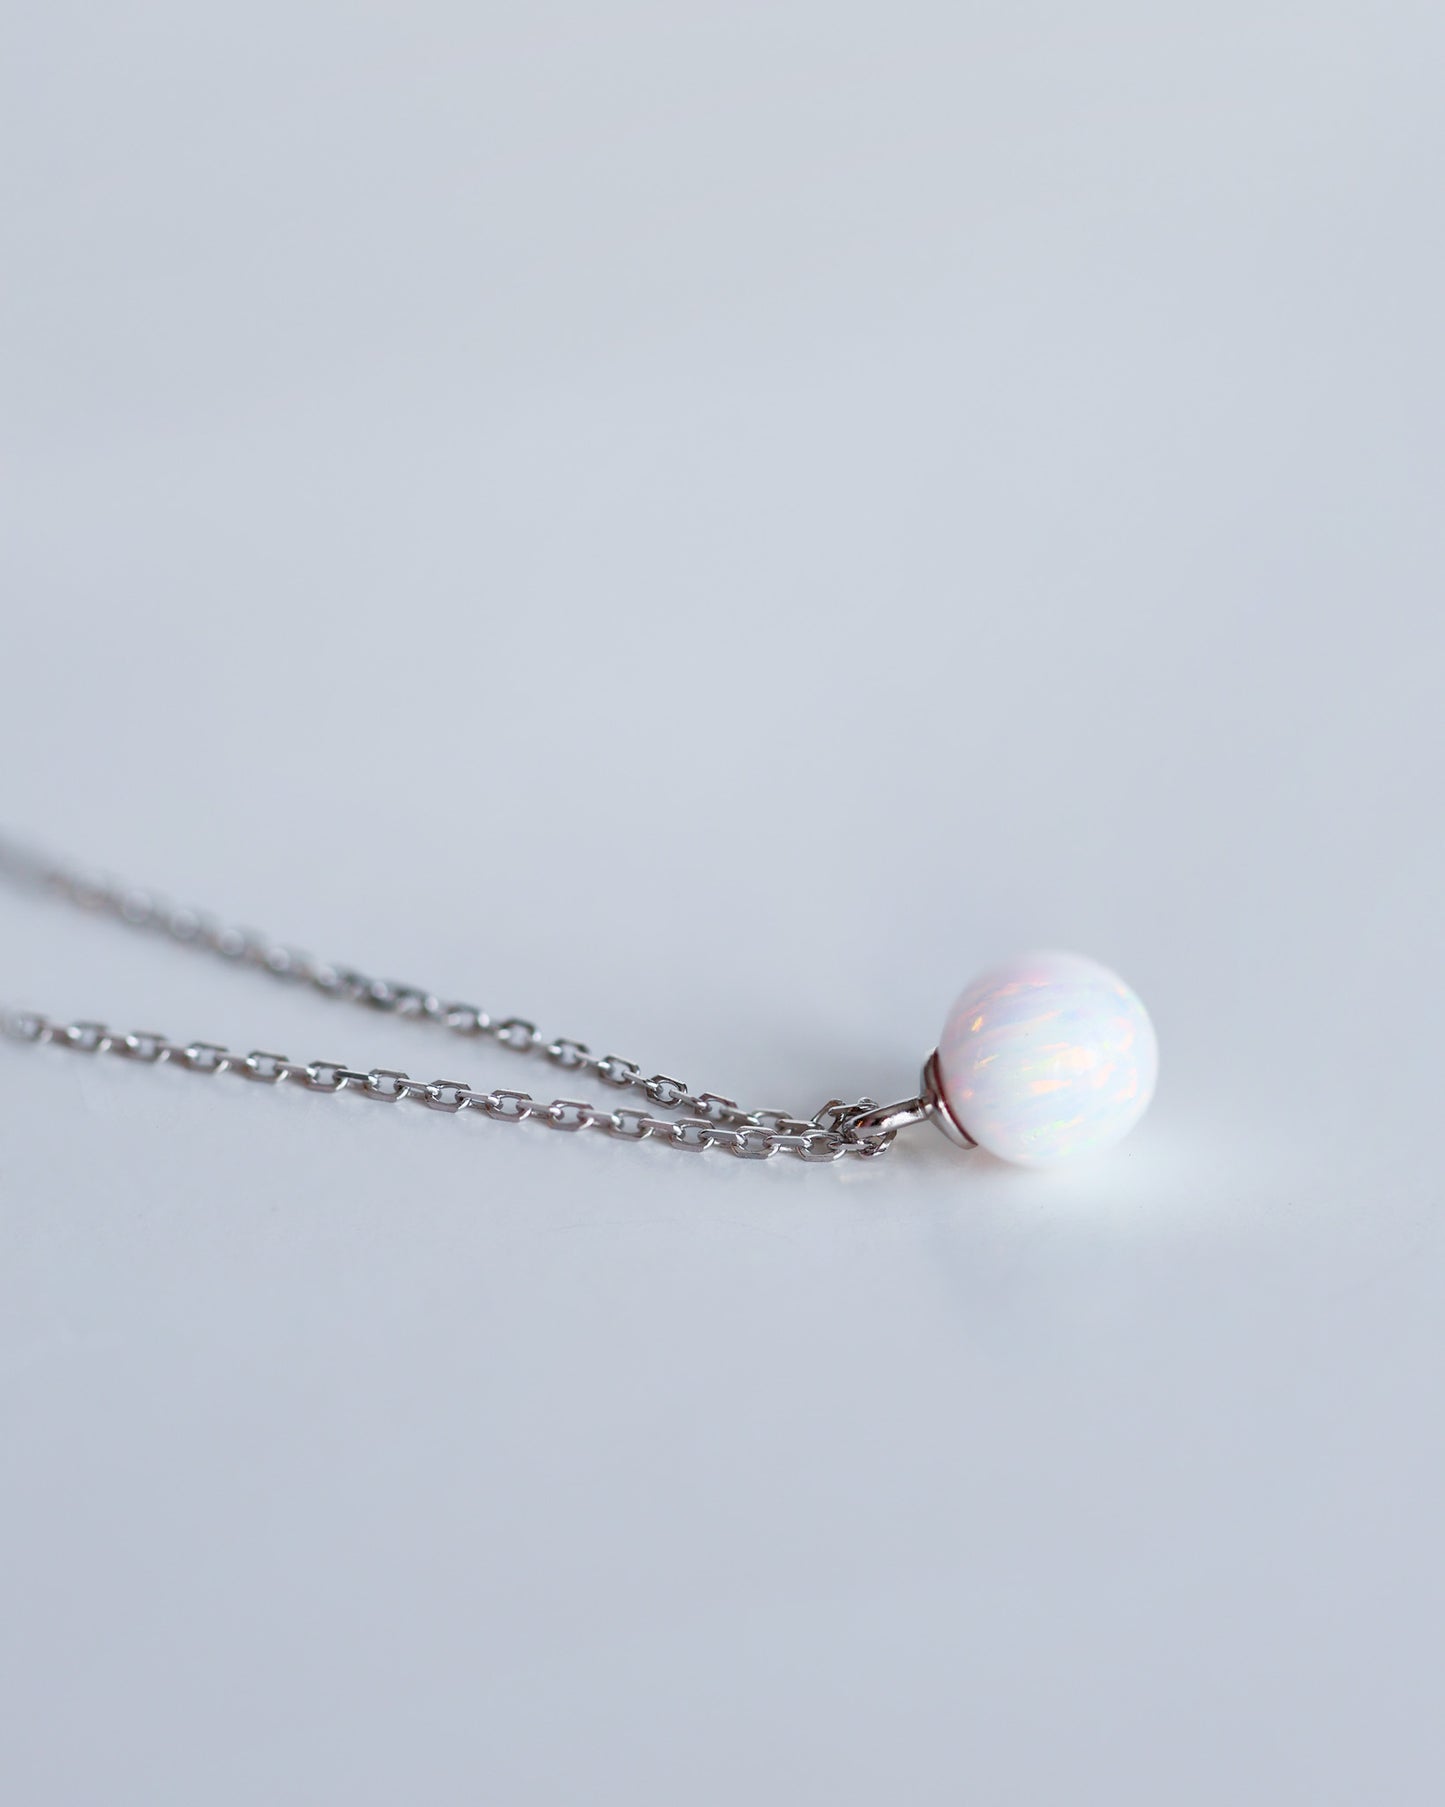 Opal pendant necklace on a delicate sliver chain